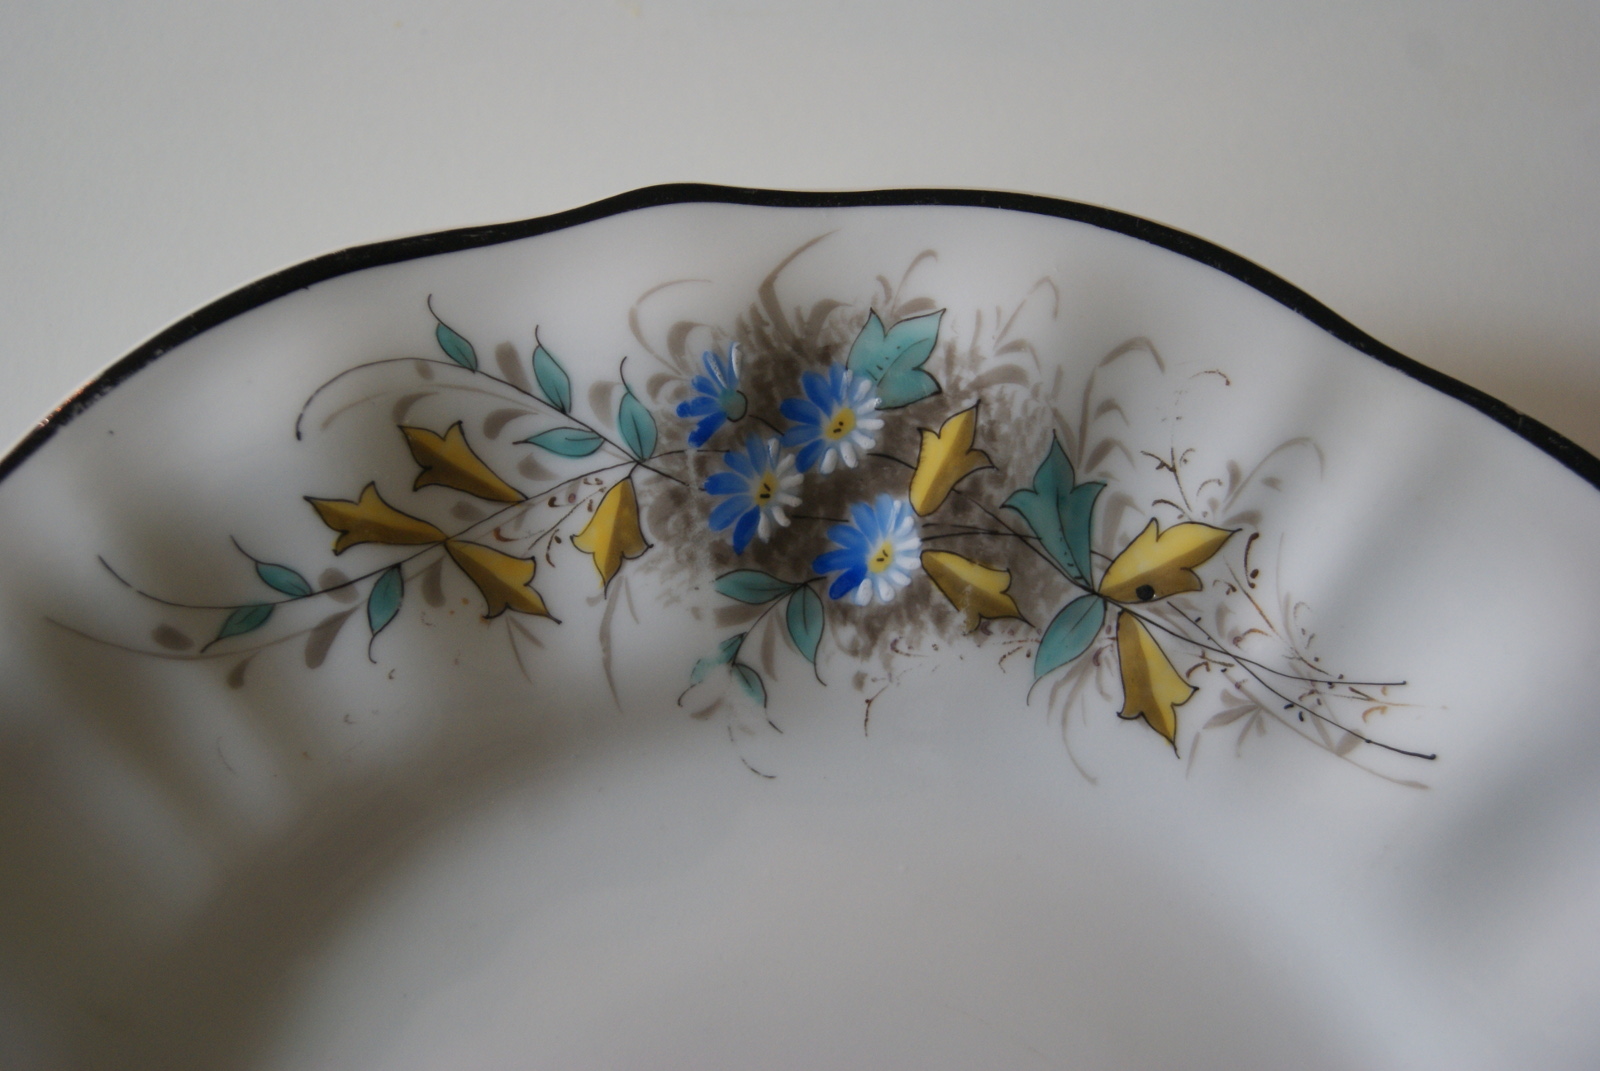 Waldenburg dish with blue and white flowers, leaves and black rim